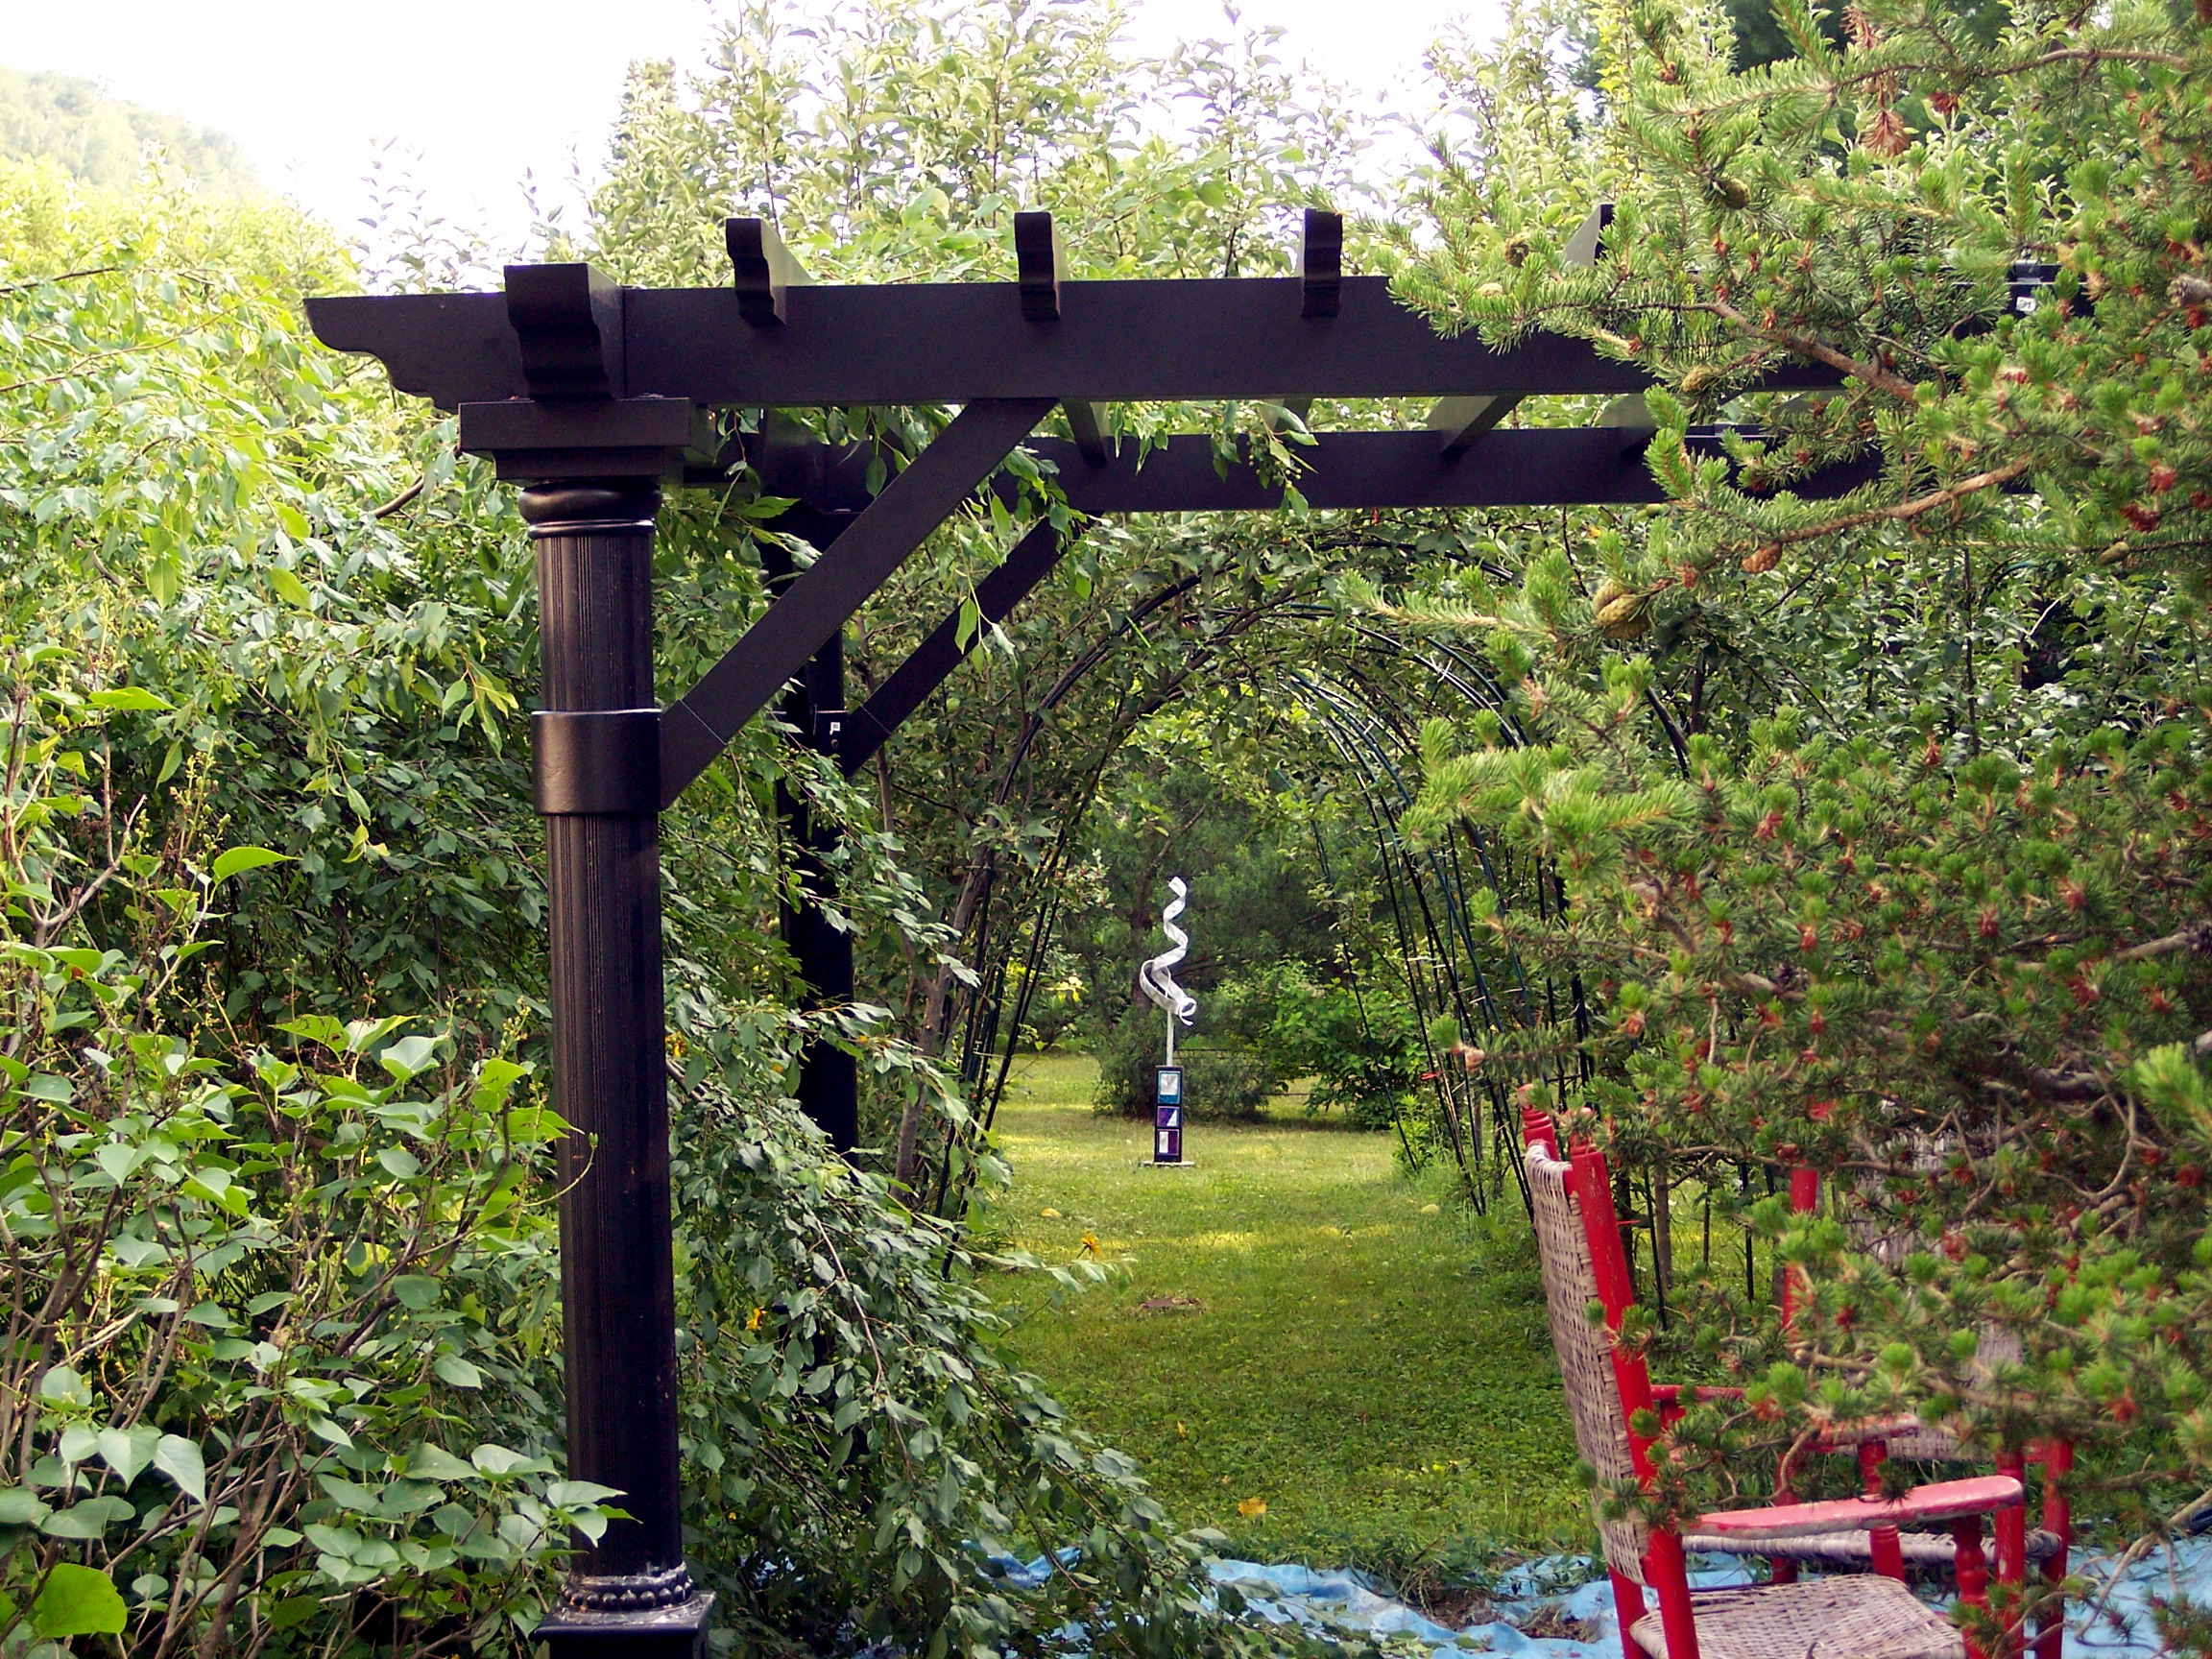 Pergola made of wood or metal for a southern flair in the garden